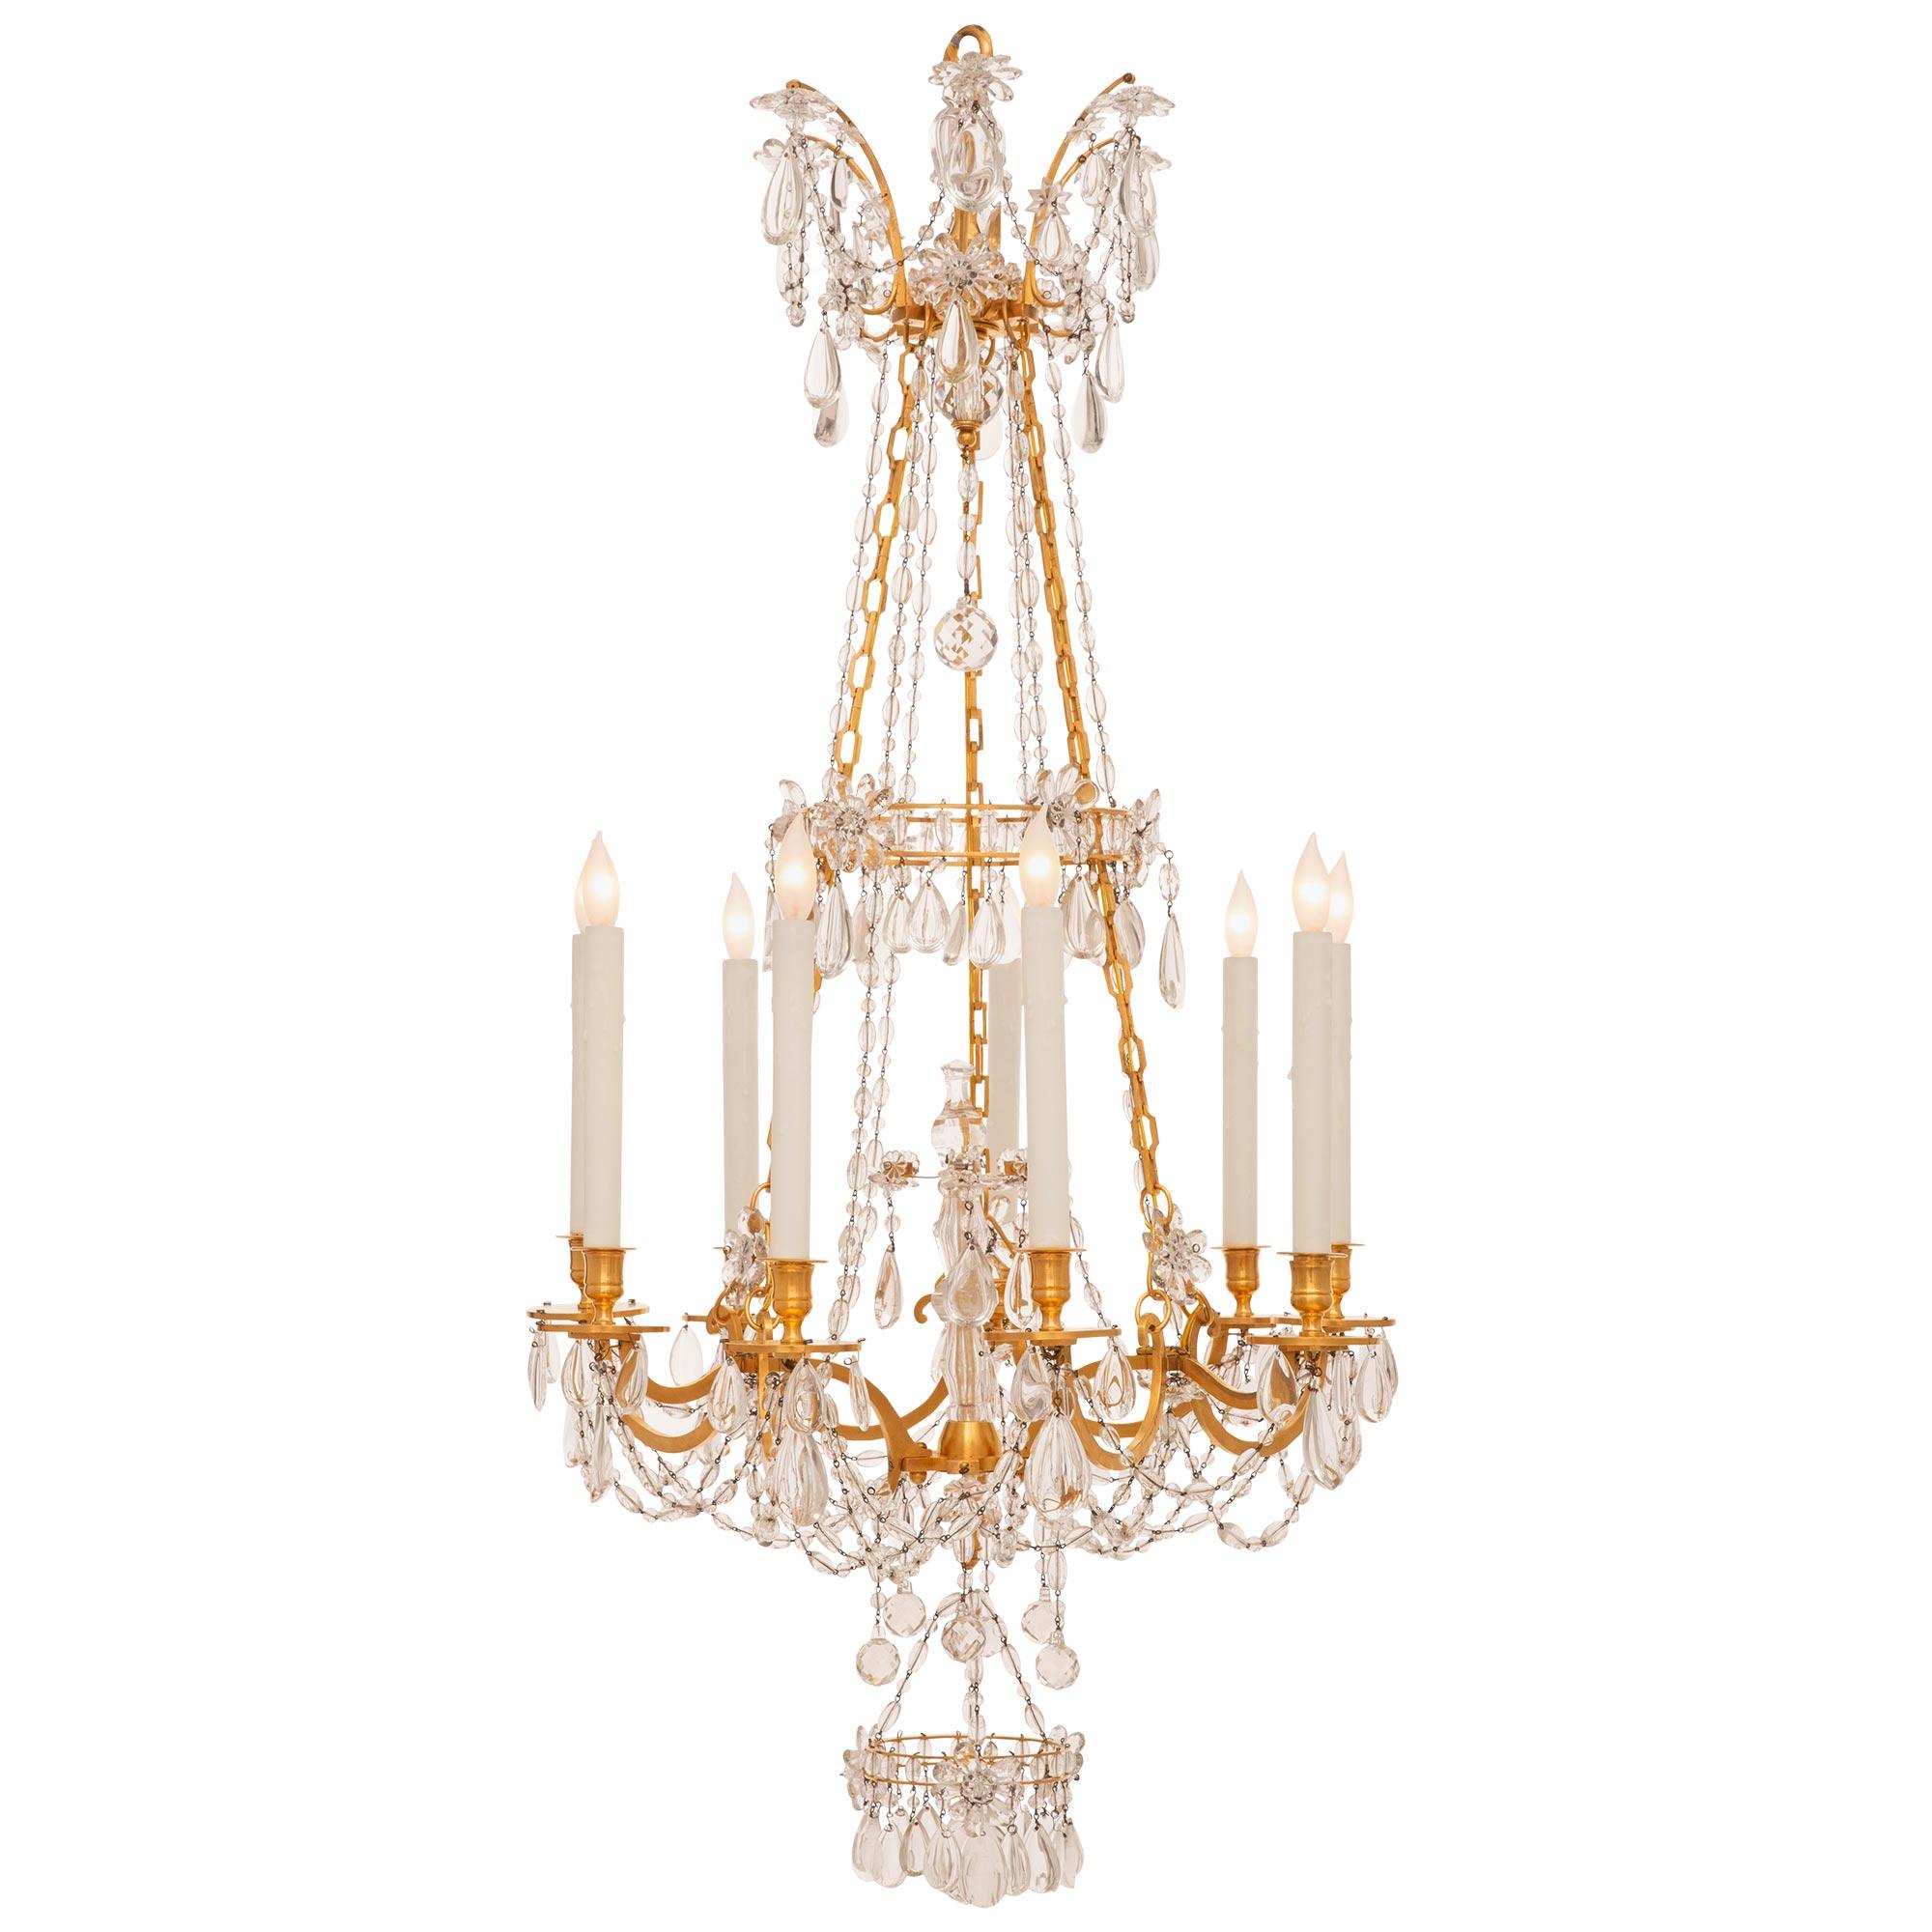 French 19th Century Louis XVI St. Ormolu & Baccarat Marie Antoinette Chandelier In Good Condition For Sale In West Palm Beach, FL